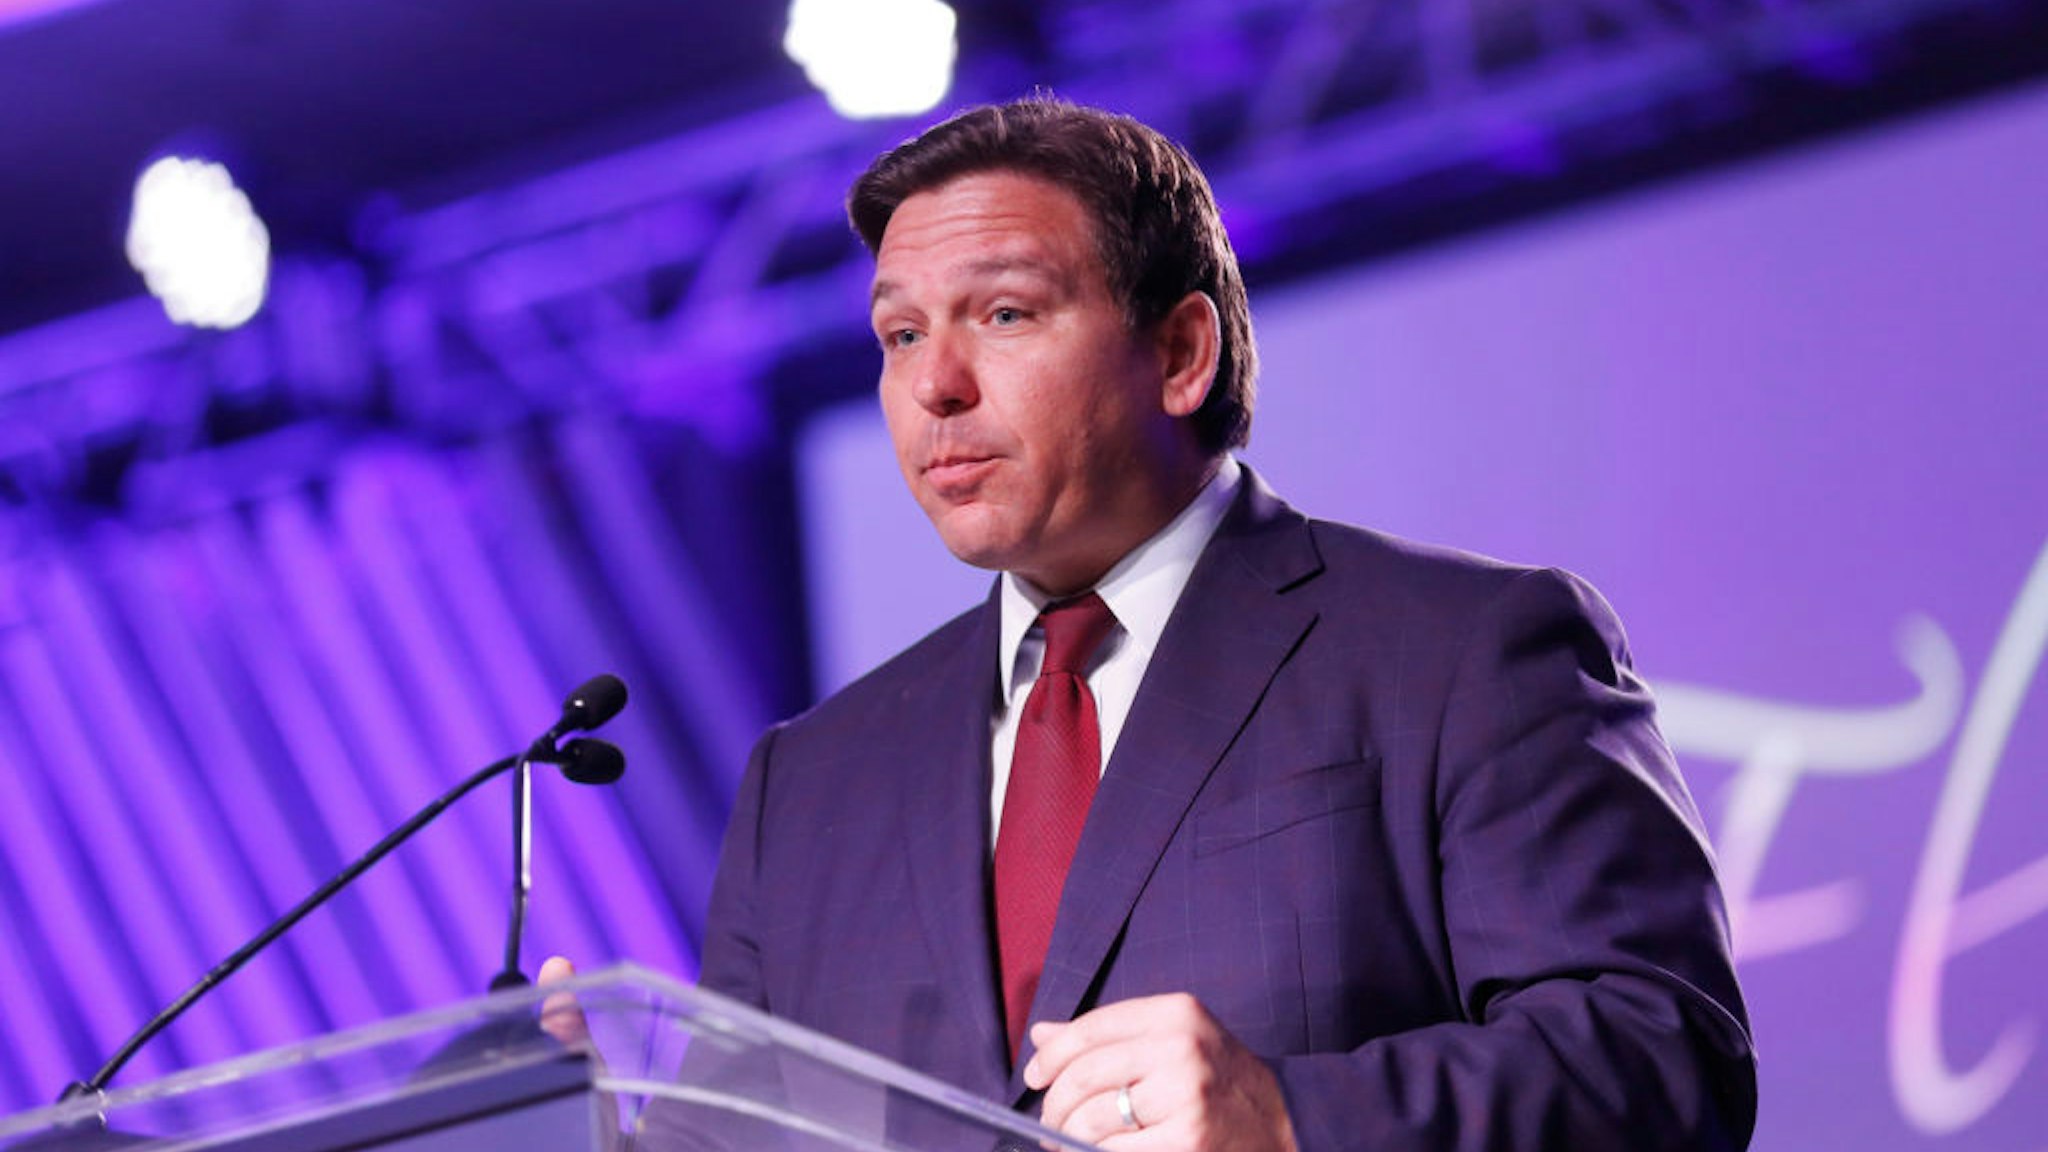 TAMPA, FL - JULY 15: Florida Governor Ron DeSantis speaks during the inaugural Moms For Liberty Summit at the Tampa Marriott Water Street on July 15, 2022 in Tampa, Florida. DeSantis is up for reelection in the 2022 Gubernatorial race against Democratic frontrunner Rep. Charlie Crist (D-FL). (Photo by Octavio Jones/Getty Images)